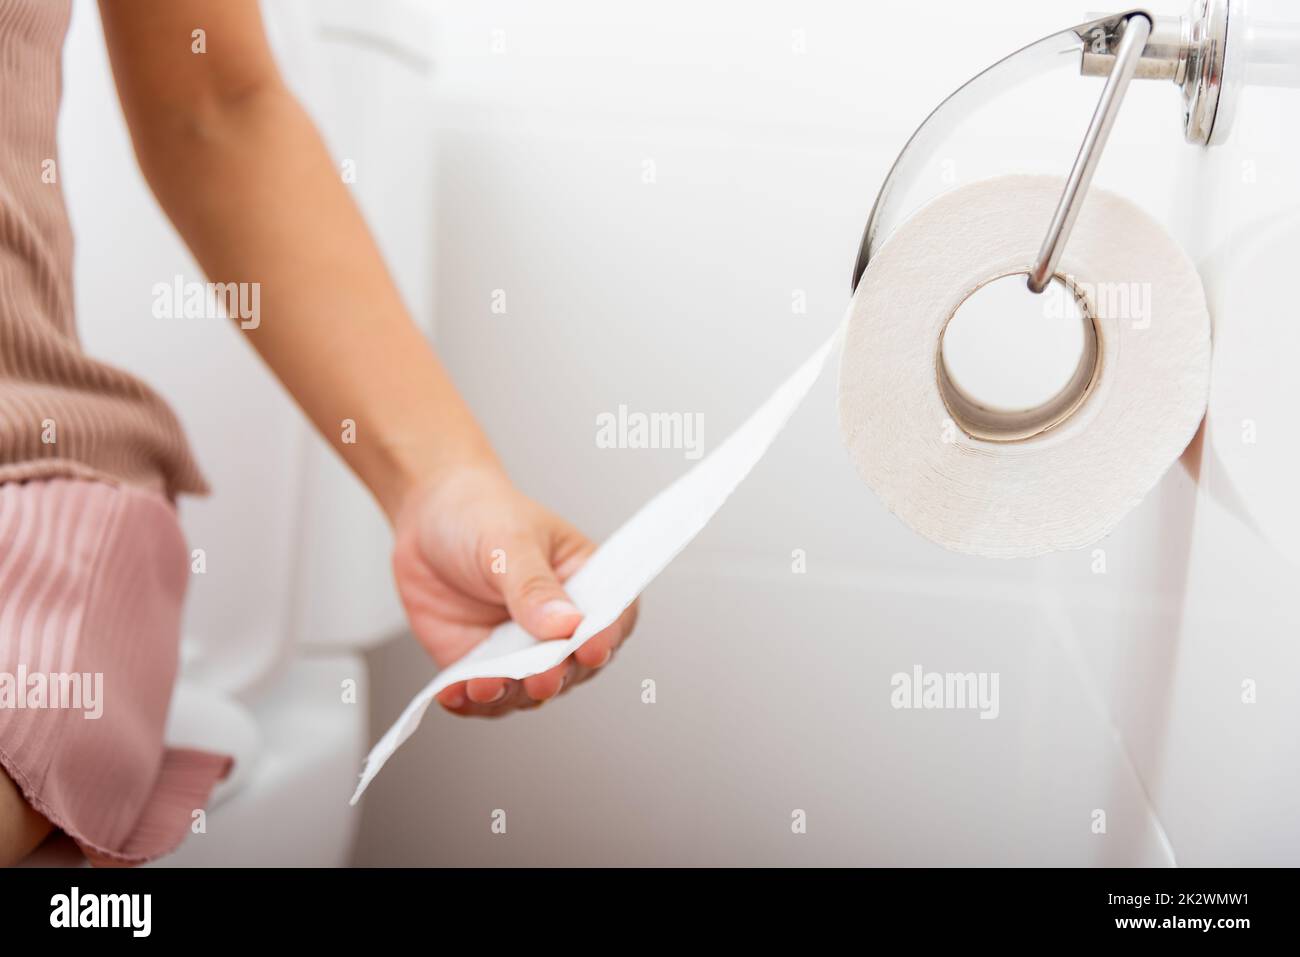 Closeup hand pulling toilet paper roll in holder for wipe.Closeup hand pulling toilet paper roll in holder for wipe, woman sitting on toilet she taking and tearing white tissue on wall to towel clean in bathroom, Healthcare concept Stock Photo